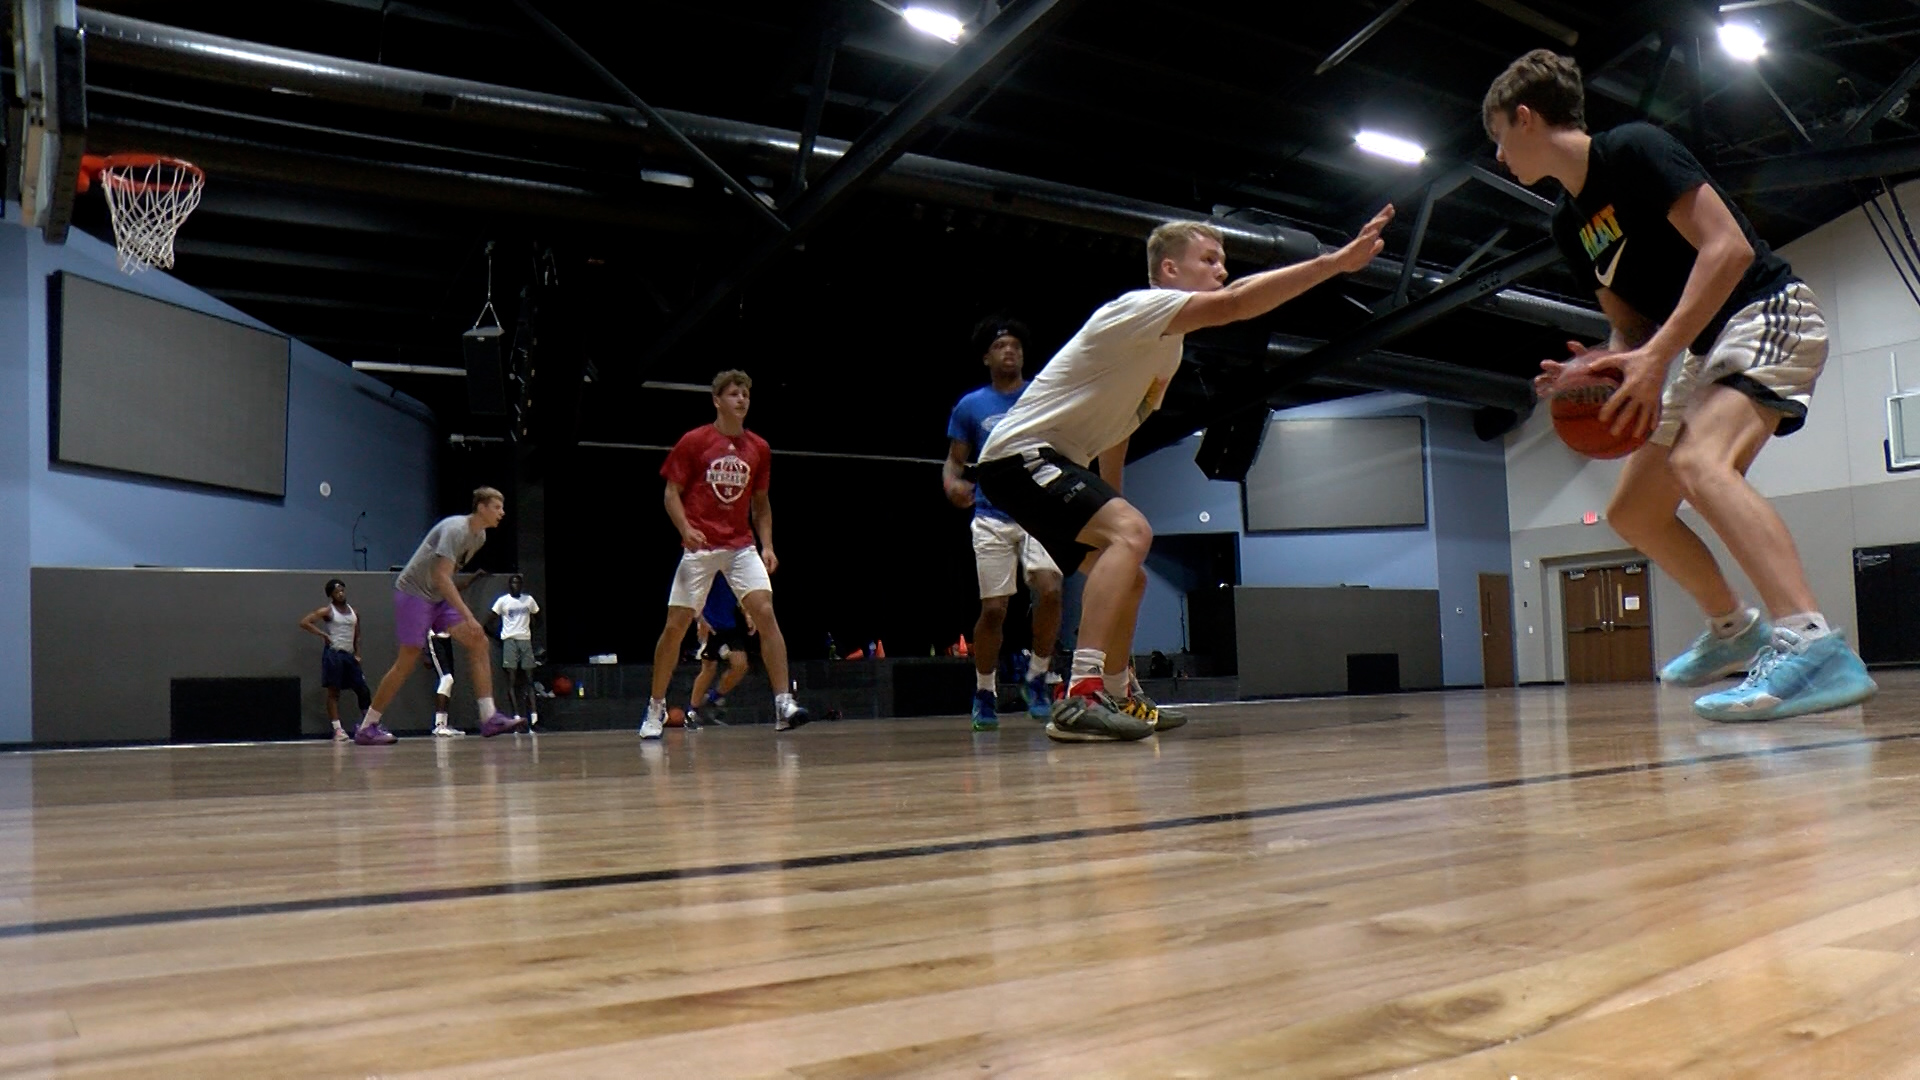 Local basketball standouts hone skills during pandemic with open gyms